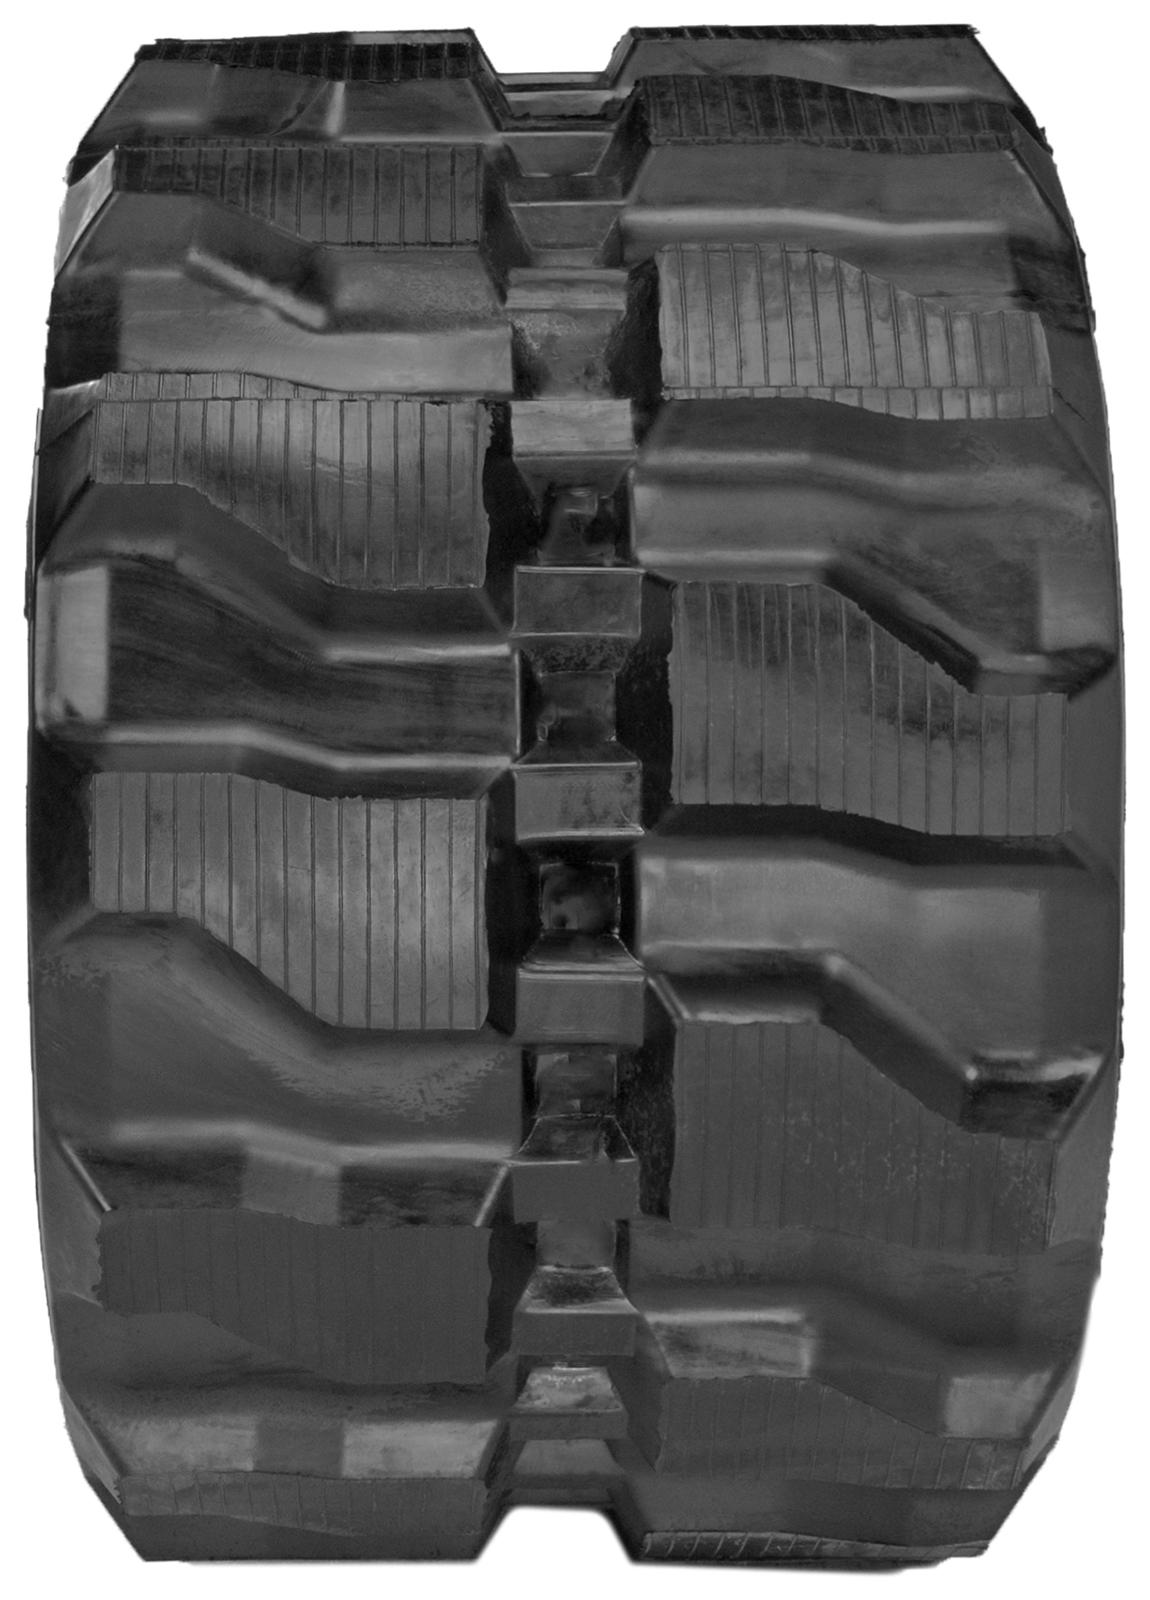 set of 2 16" heavy duty rubber track (400x72.5yx72)